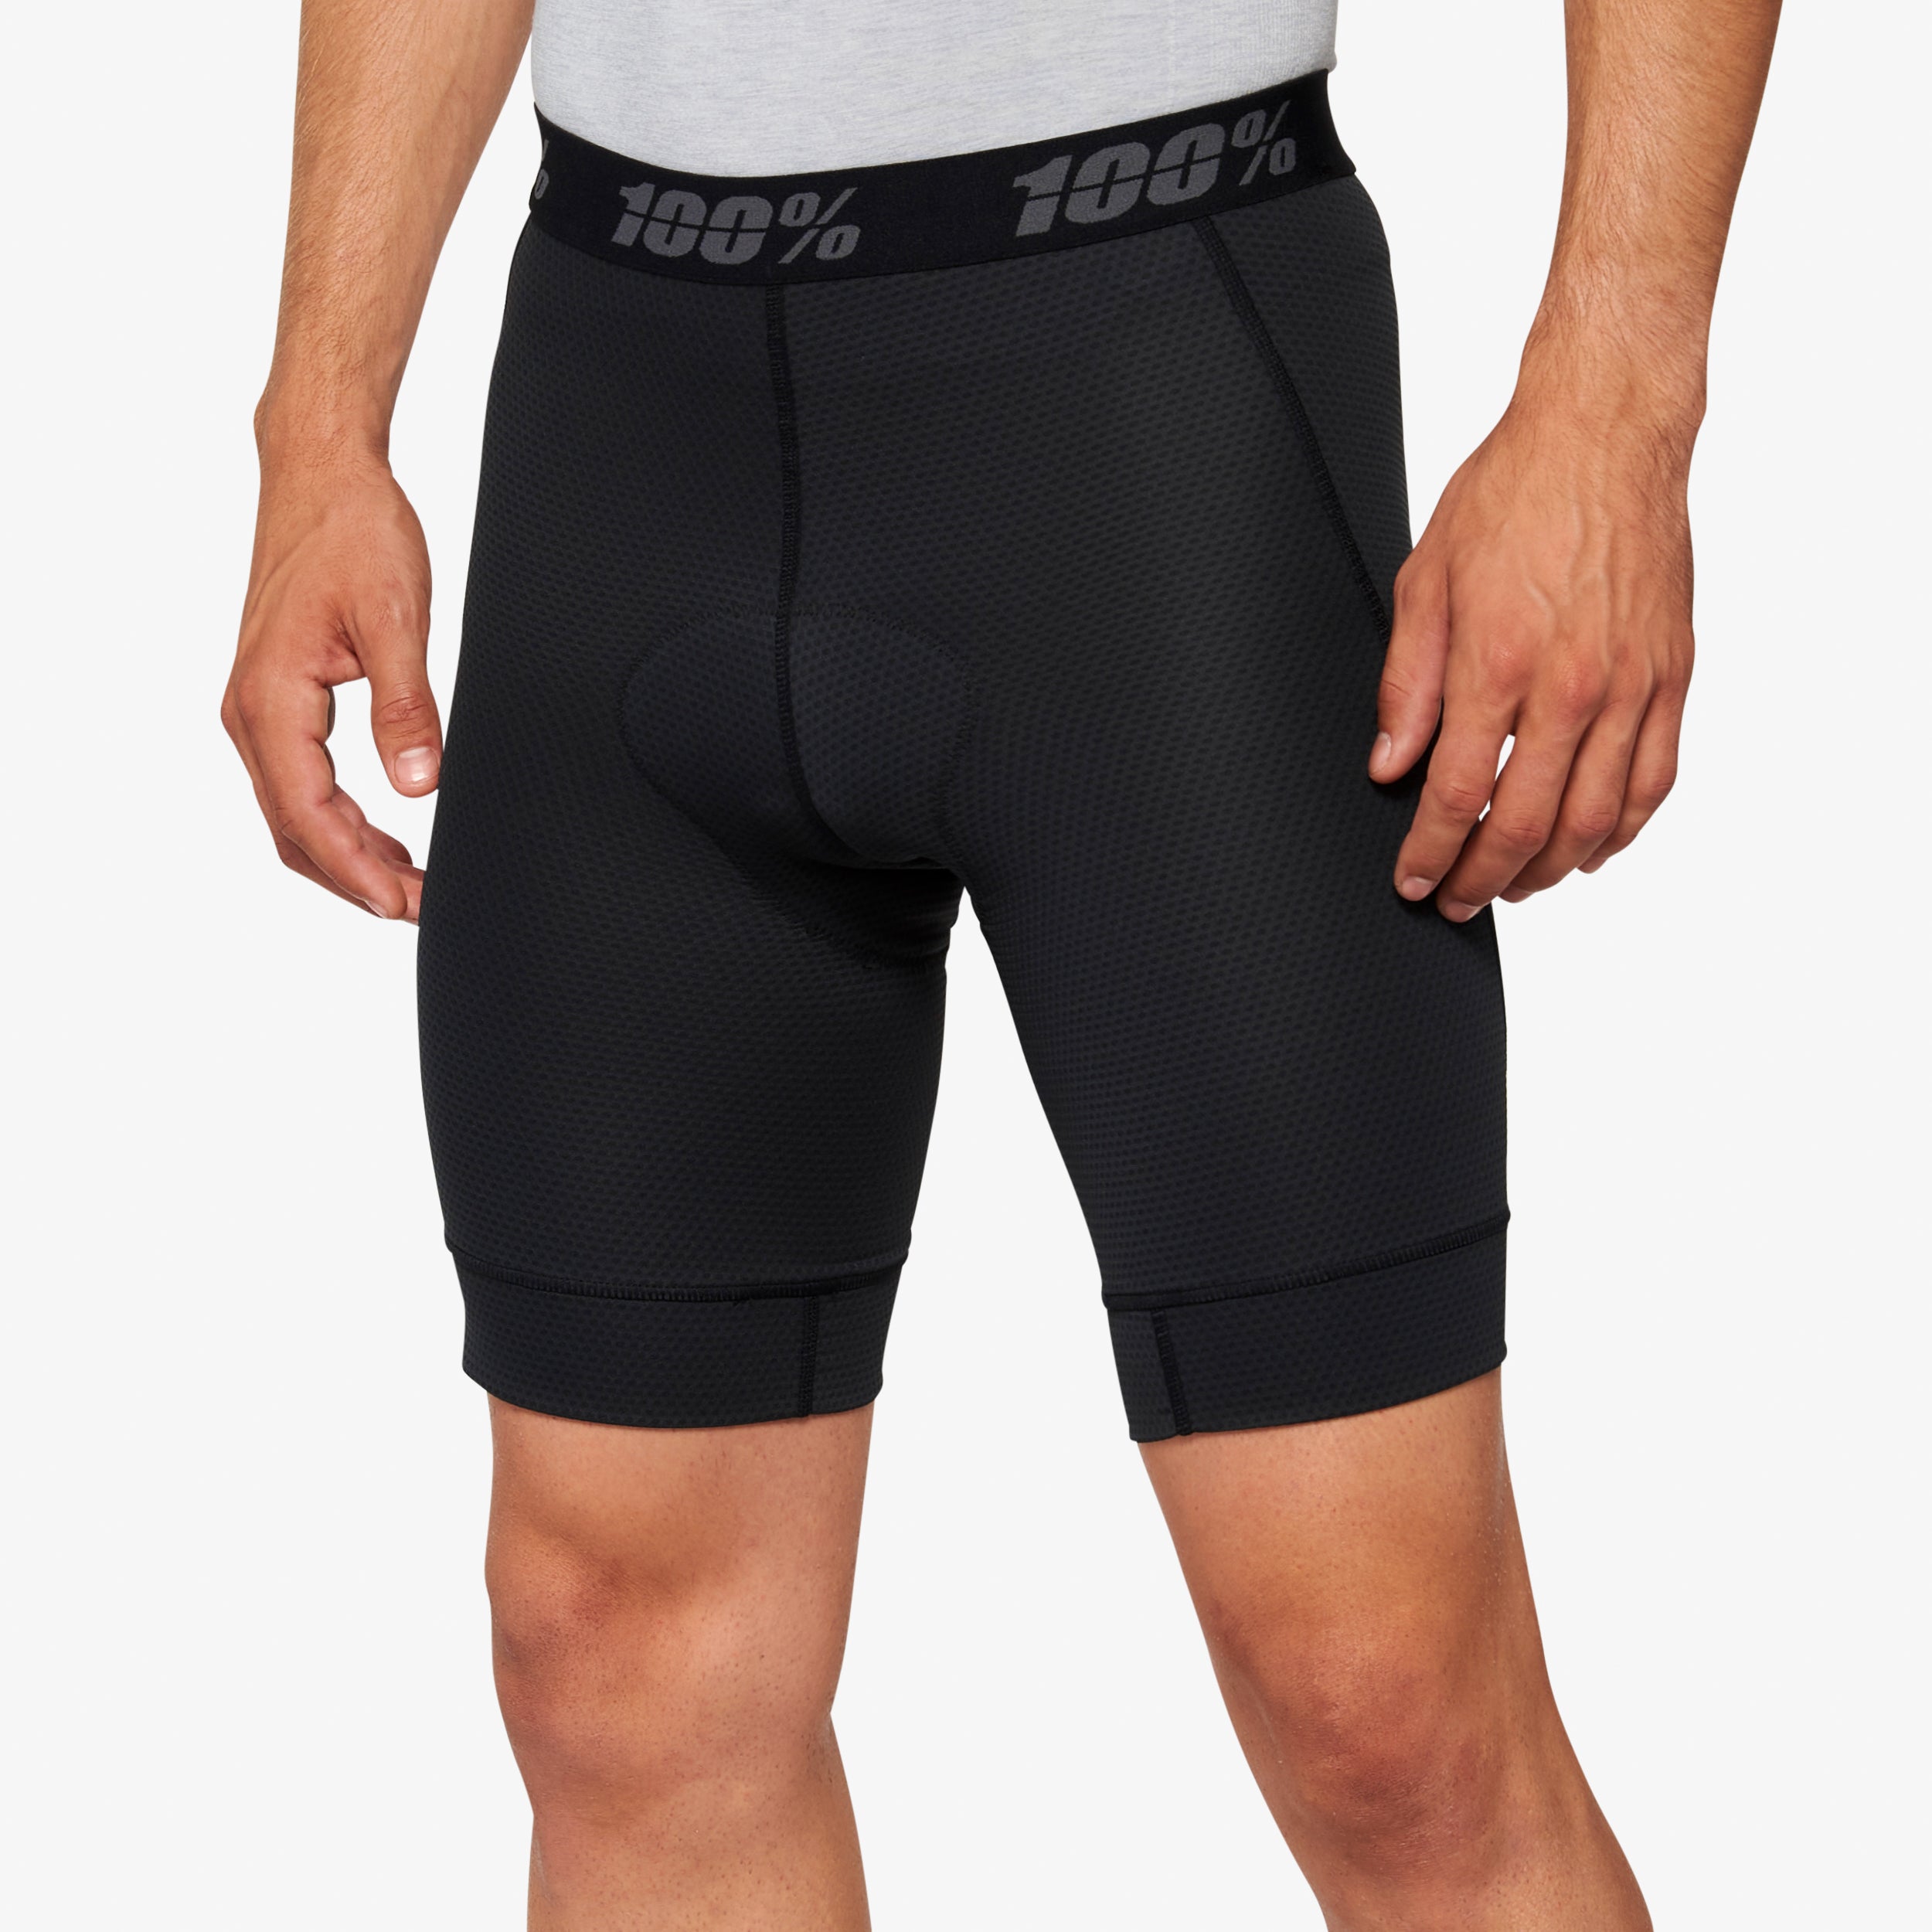 RIDECAMP Shorts w/ Liner Black - Secondary